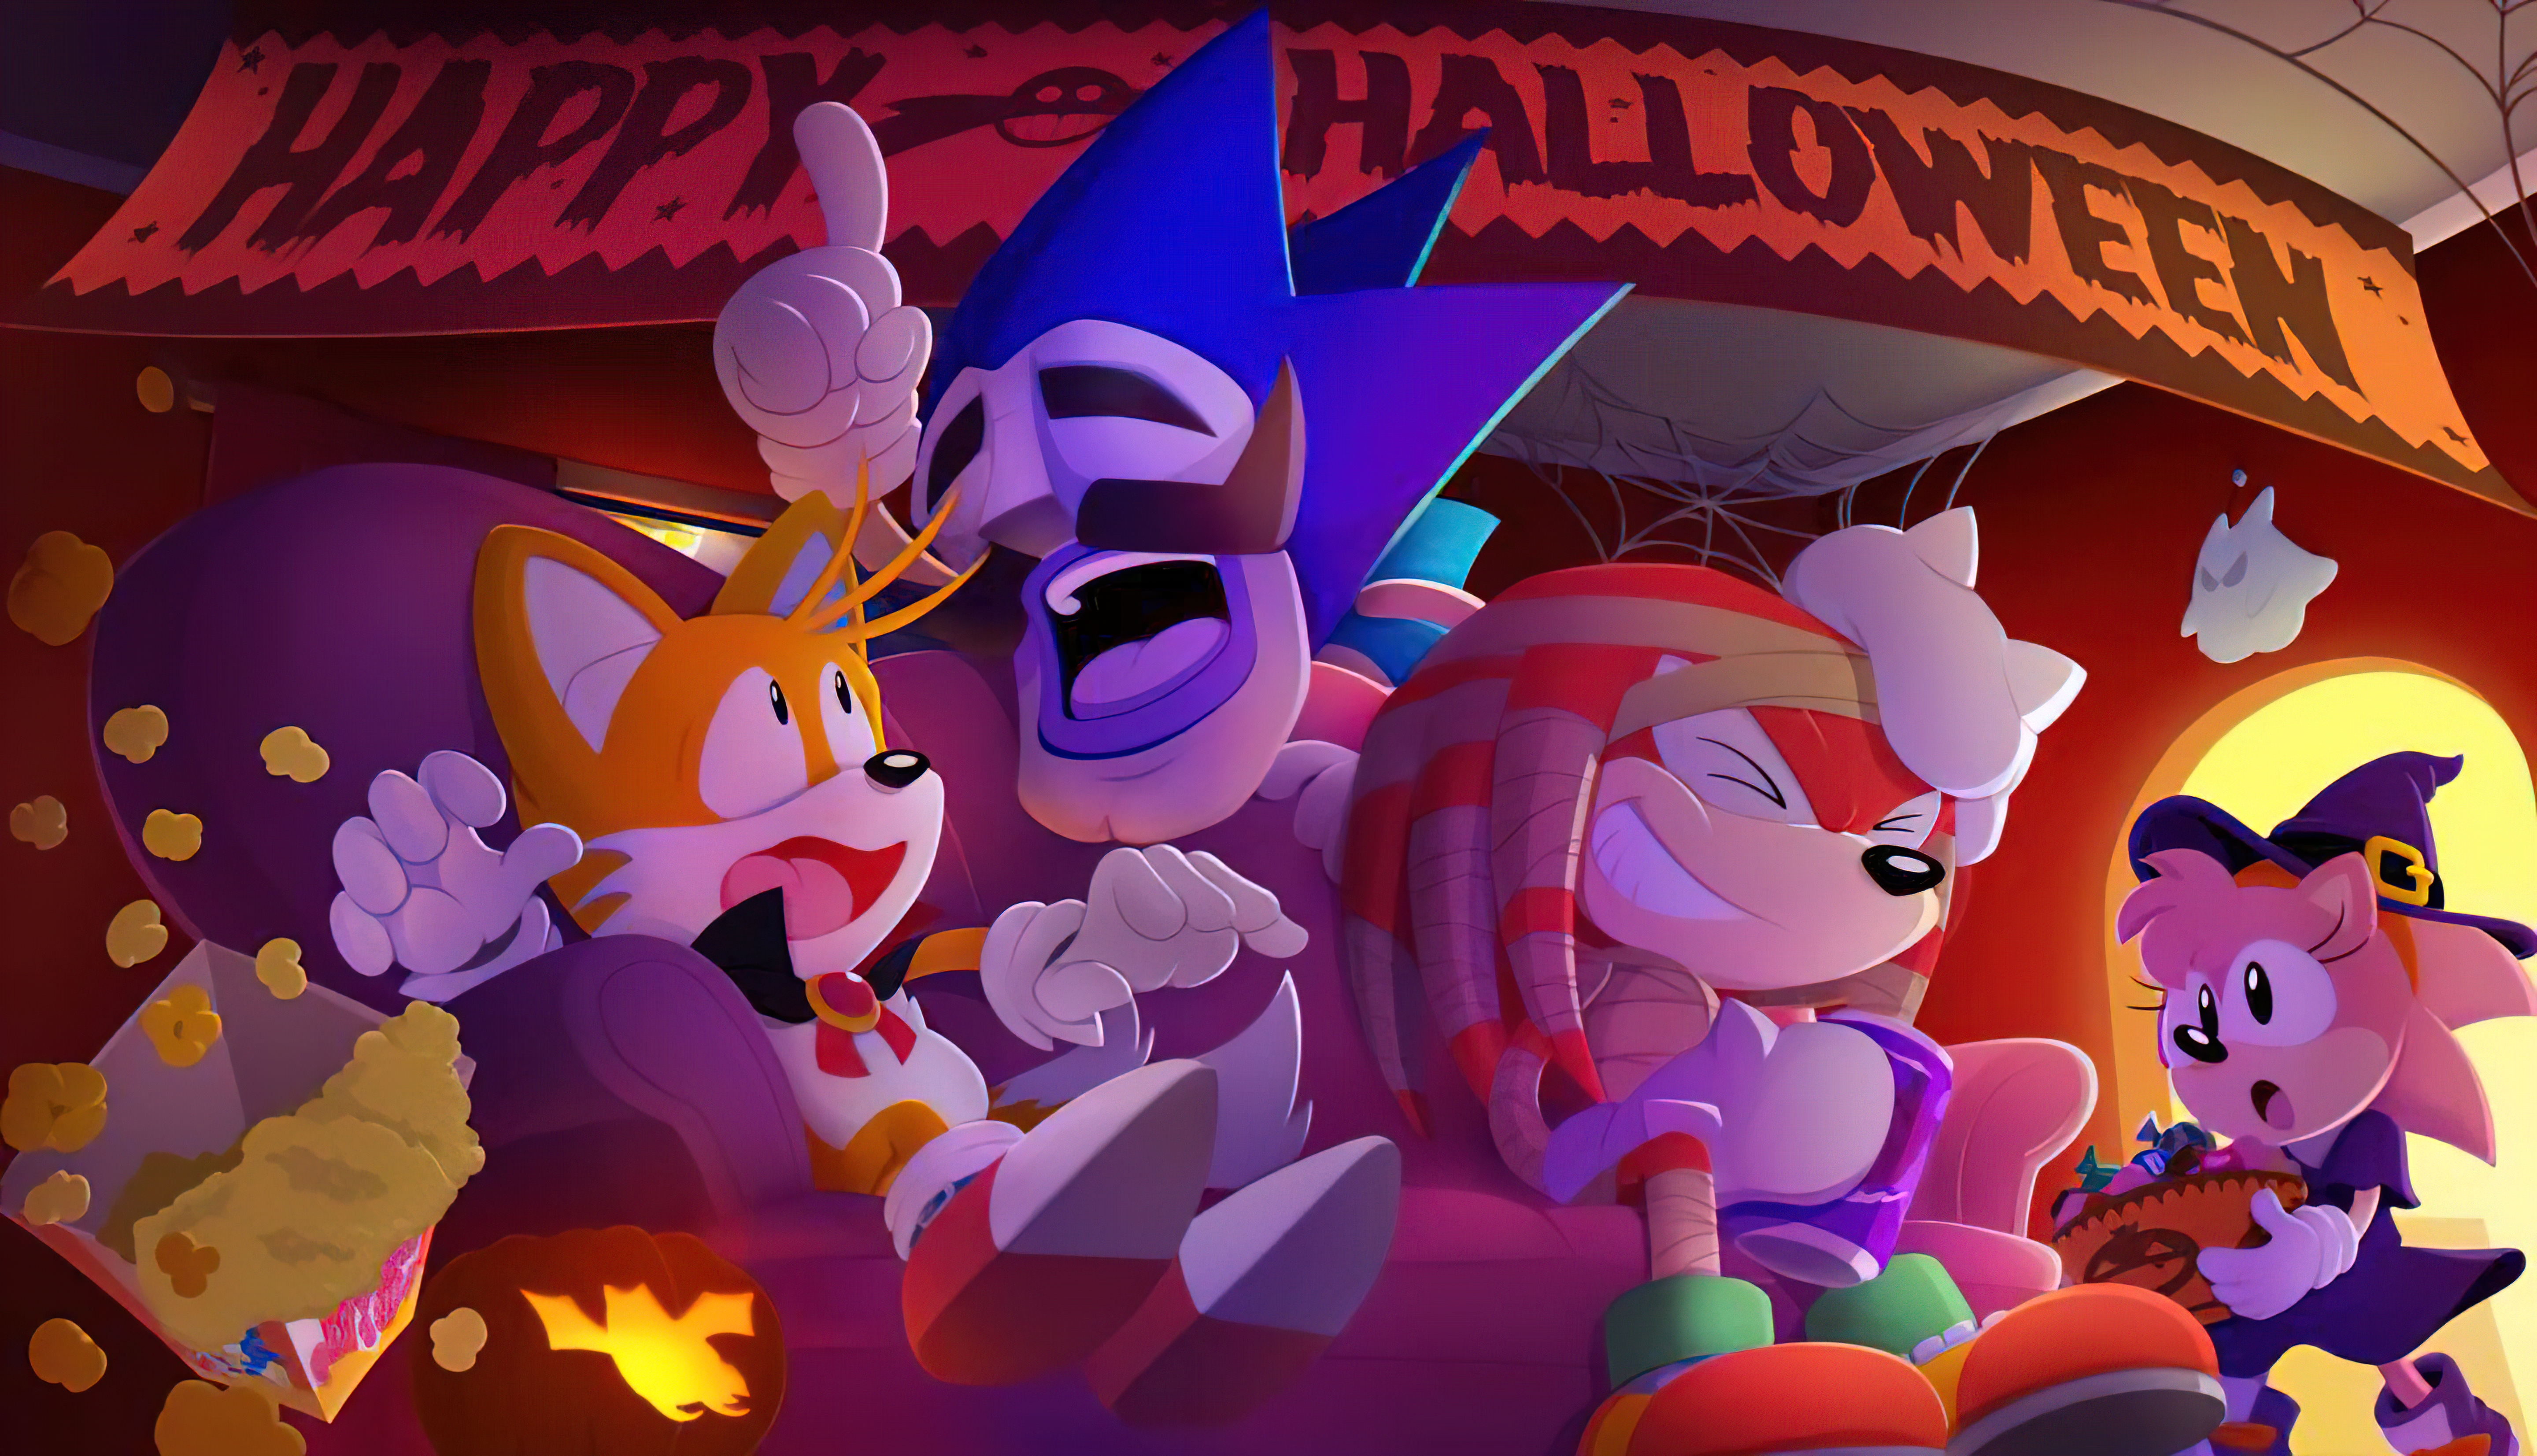 Sonic sonic the hedgehog tails character sega video game art knuckles pc gaming halloween halloween wallpaper